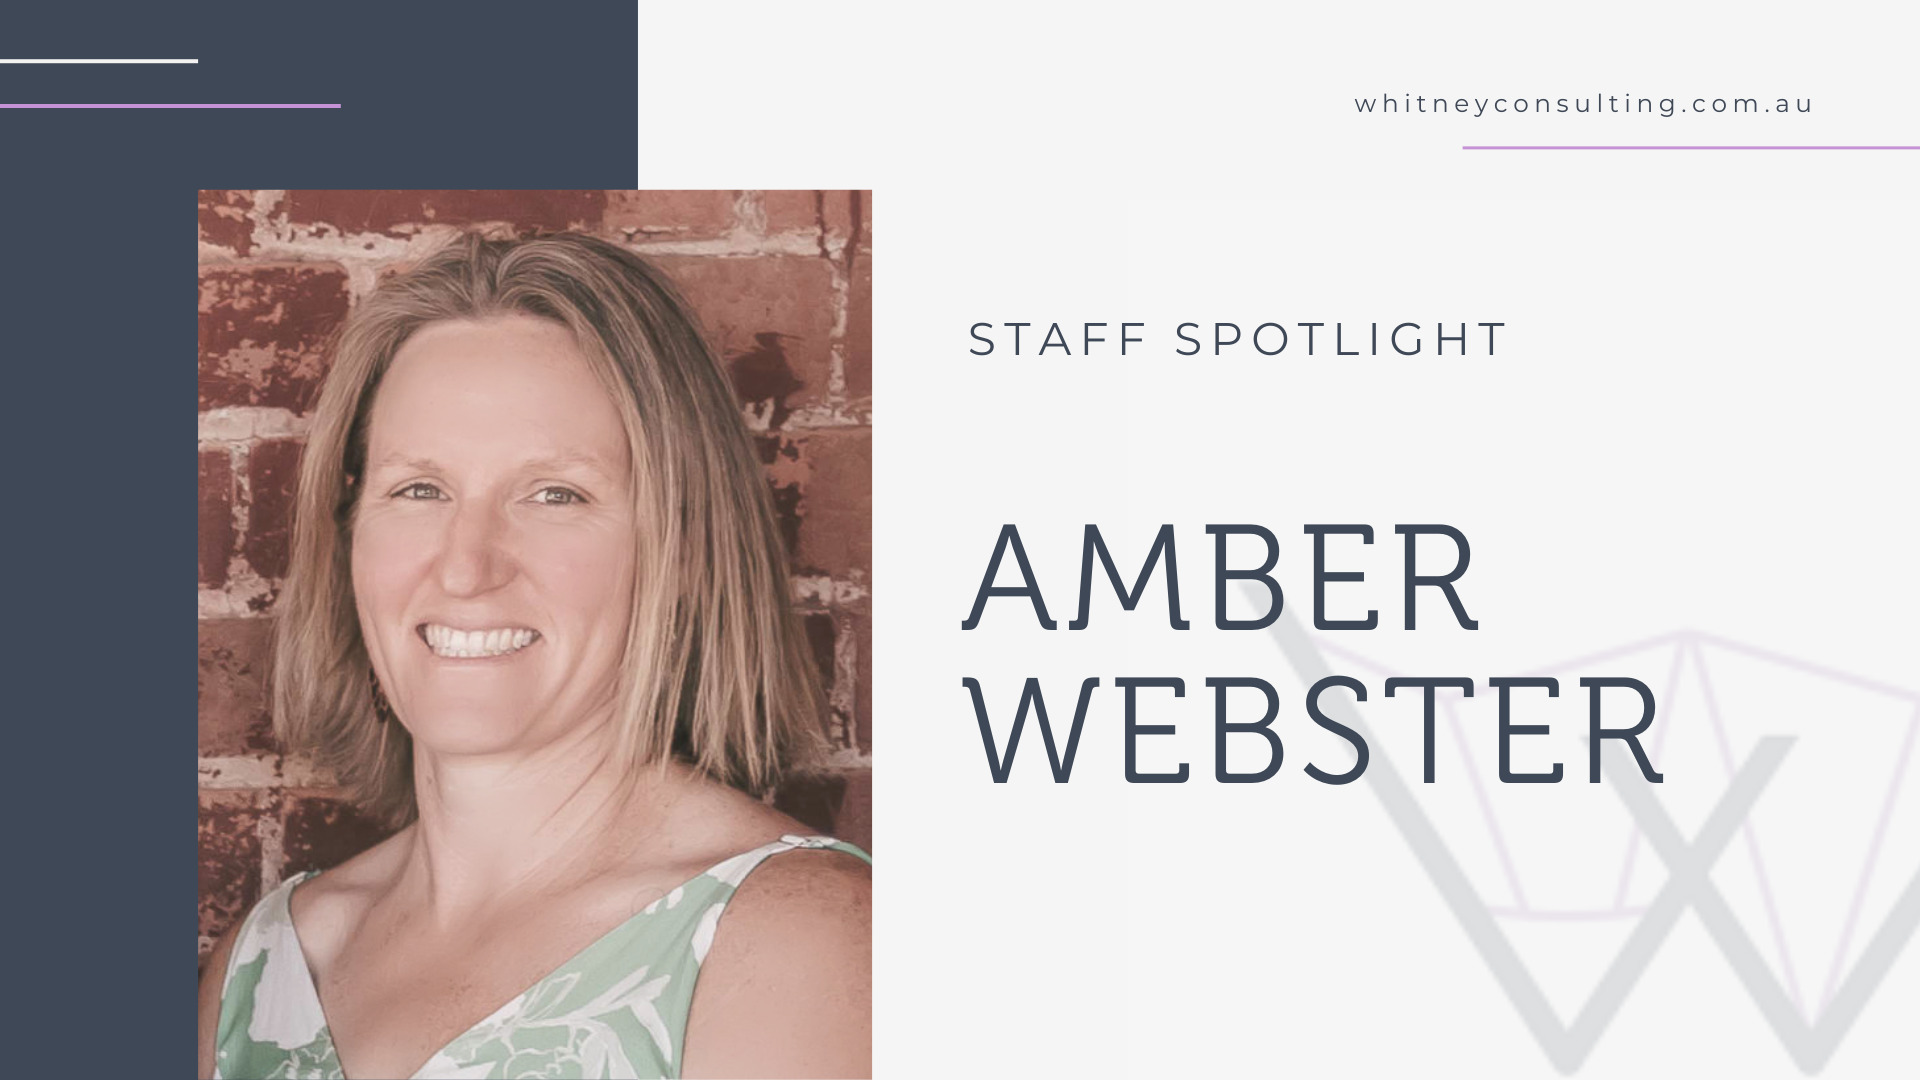 Amber Webster - Whitney Consulting